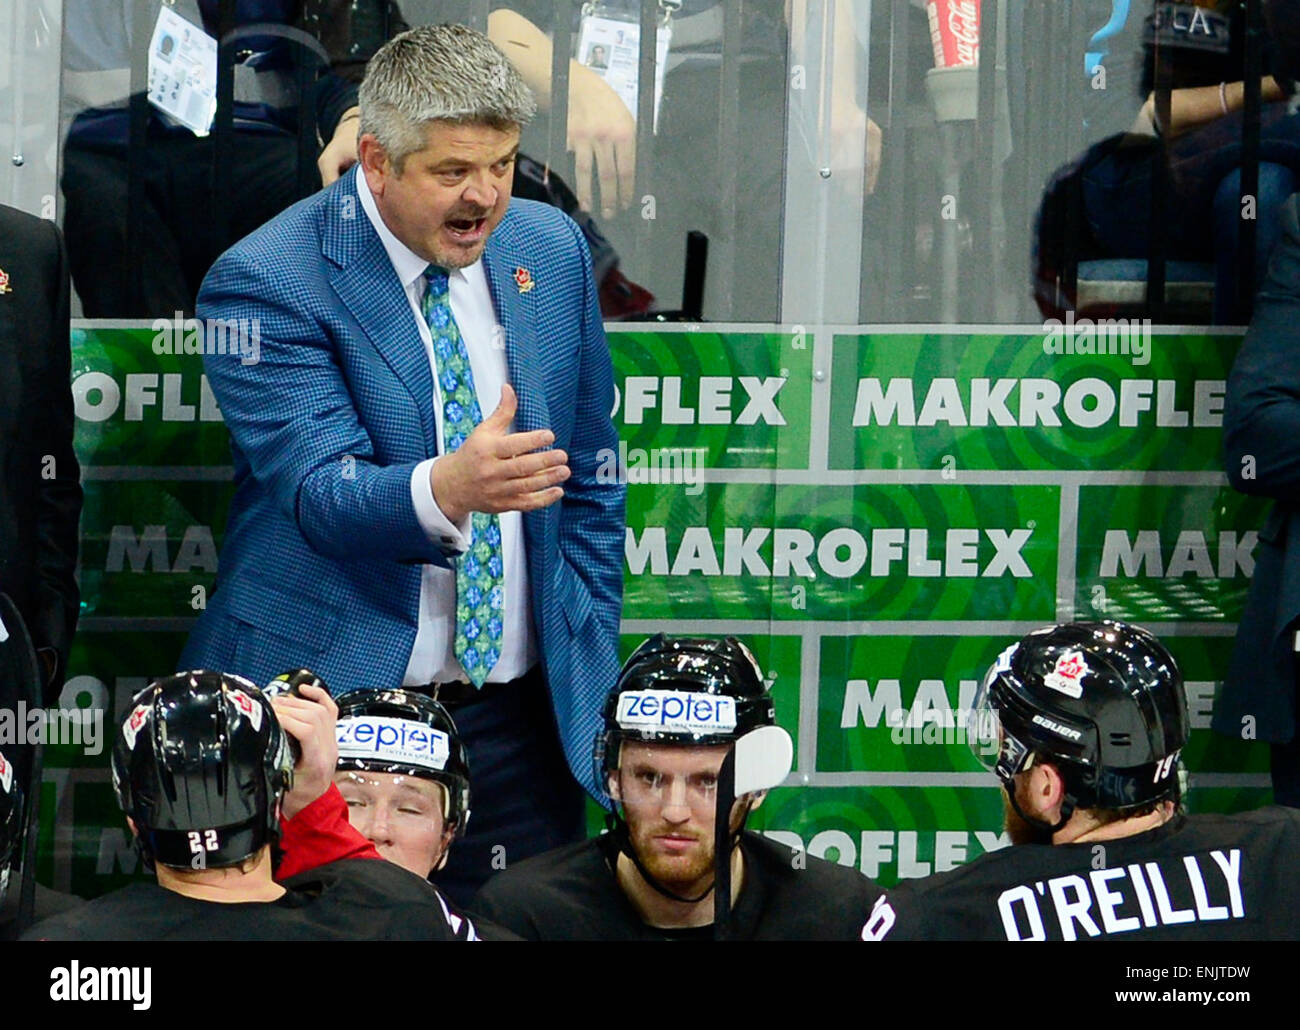 Prague, Czech Republic. 6th May, 2015. Canadian coach Todd McLellan gestures during the Ice Hockey World Championship Group A match Sweden vs Canada in Prague, Czech Republic, May 6, 2015. © Roman Vondrous/CTK Photo/Alamy Live News Stock Photo